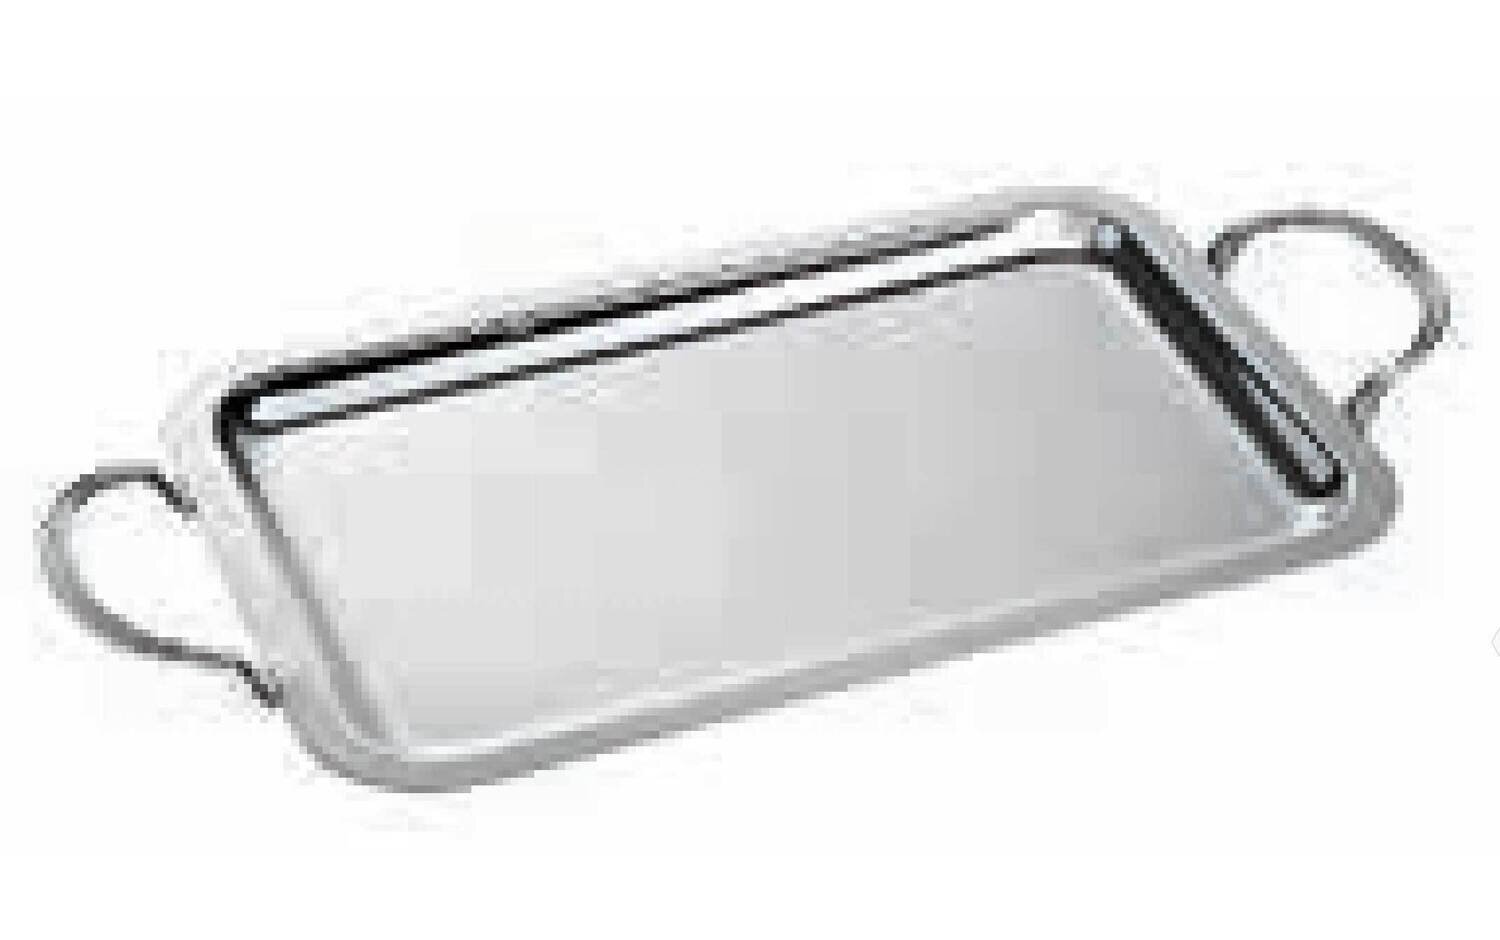 Ercuis Classique Rectangular Serving Tray With Handles 19.625 x 15 Inch Silver Plated F530450-50